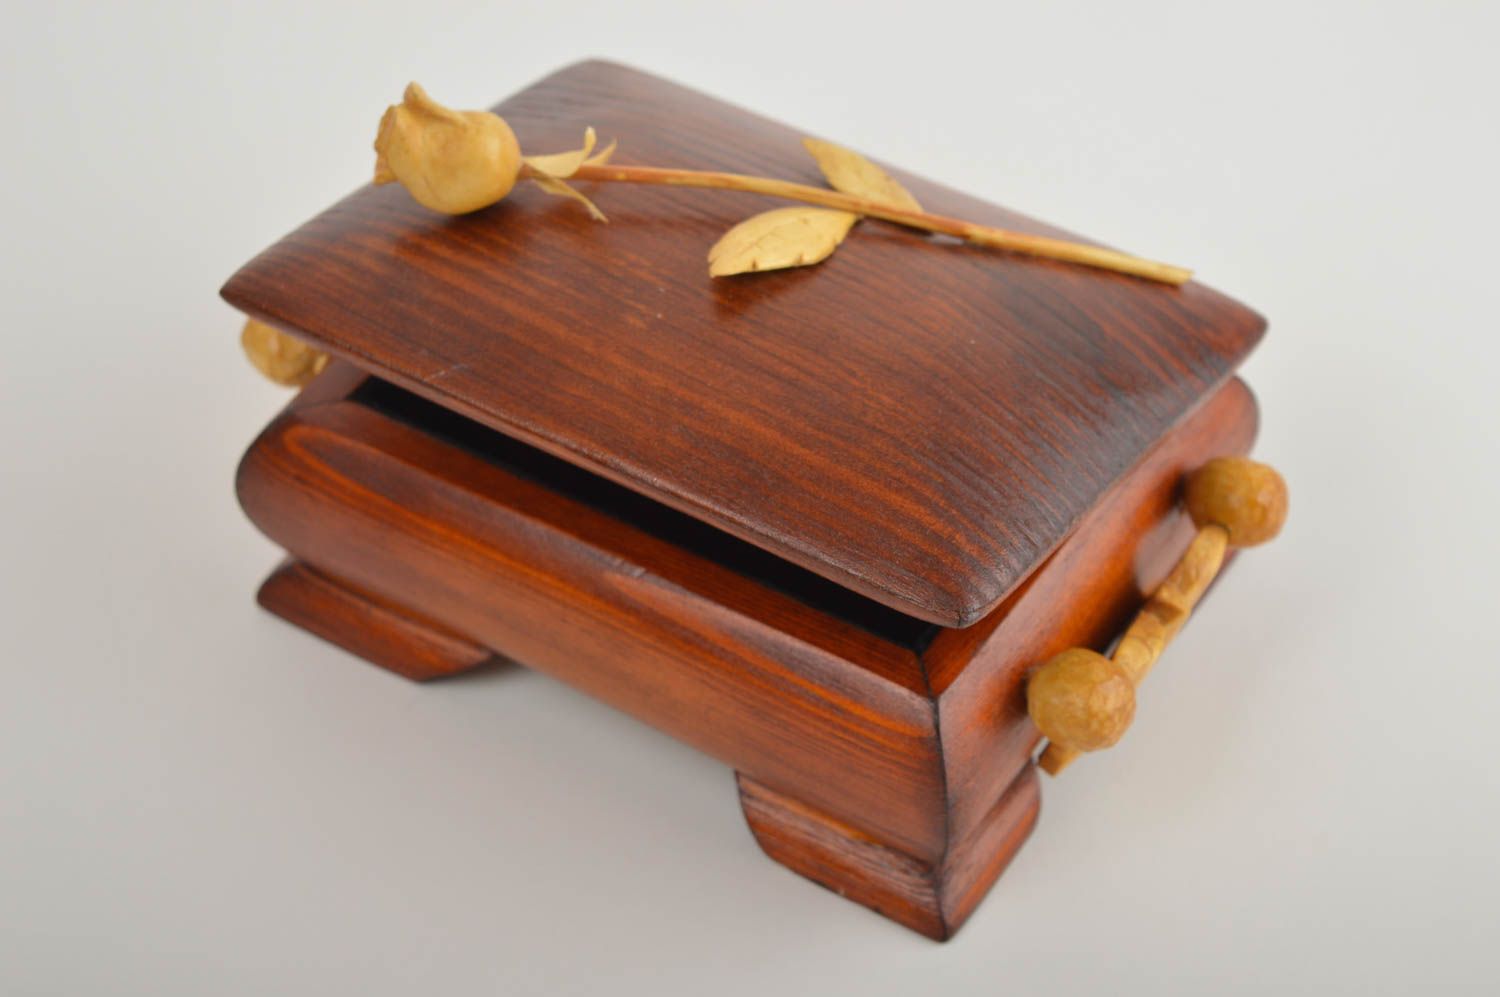 Handmade jewelry box wooden jewelry box jewelry gift boxes gifts for women photo 2